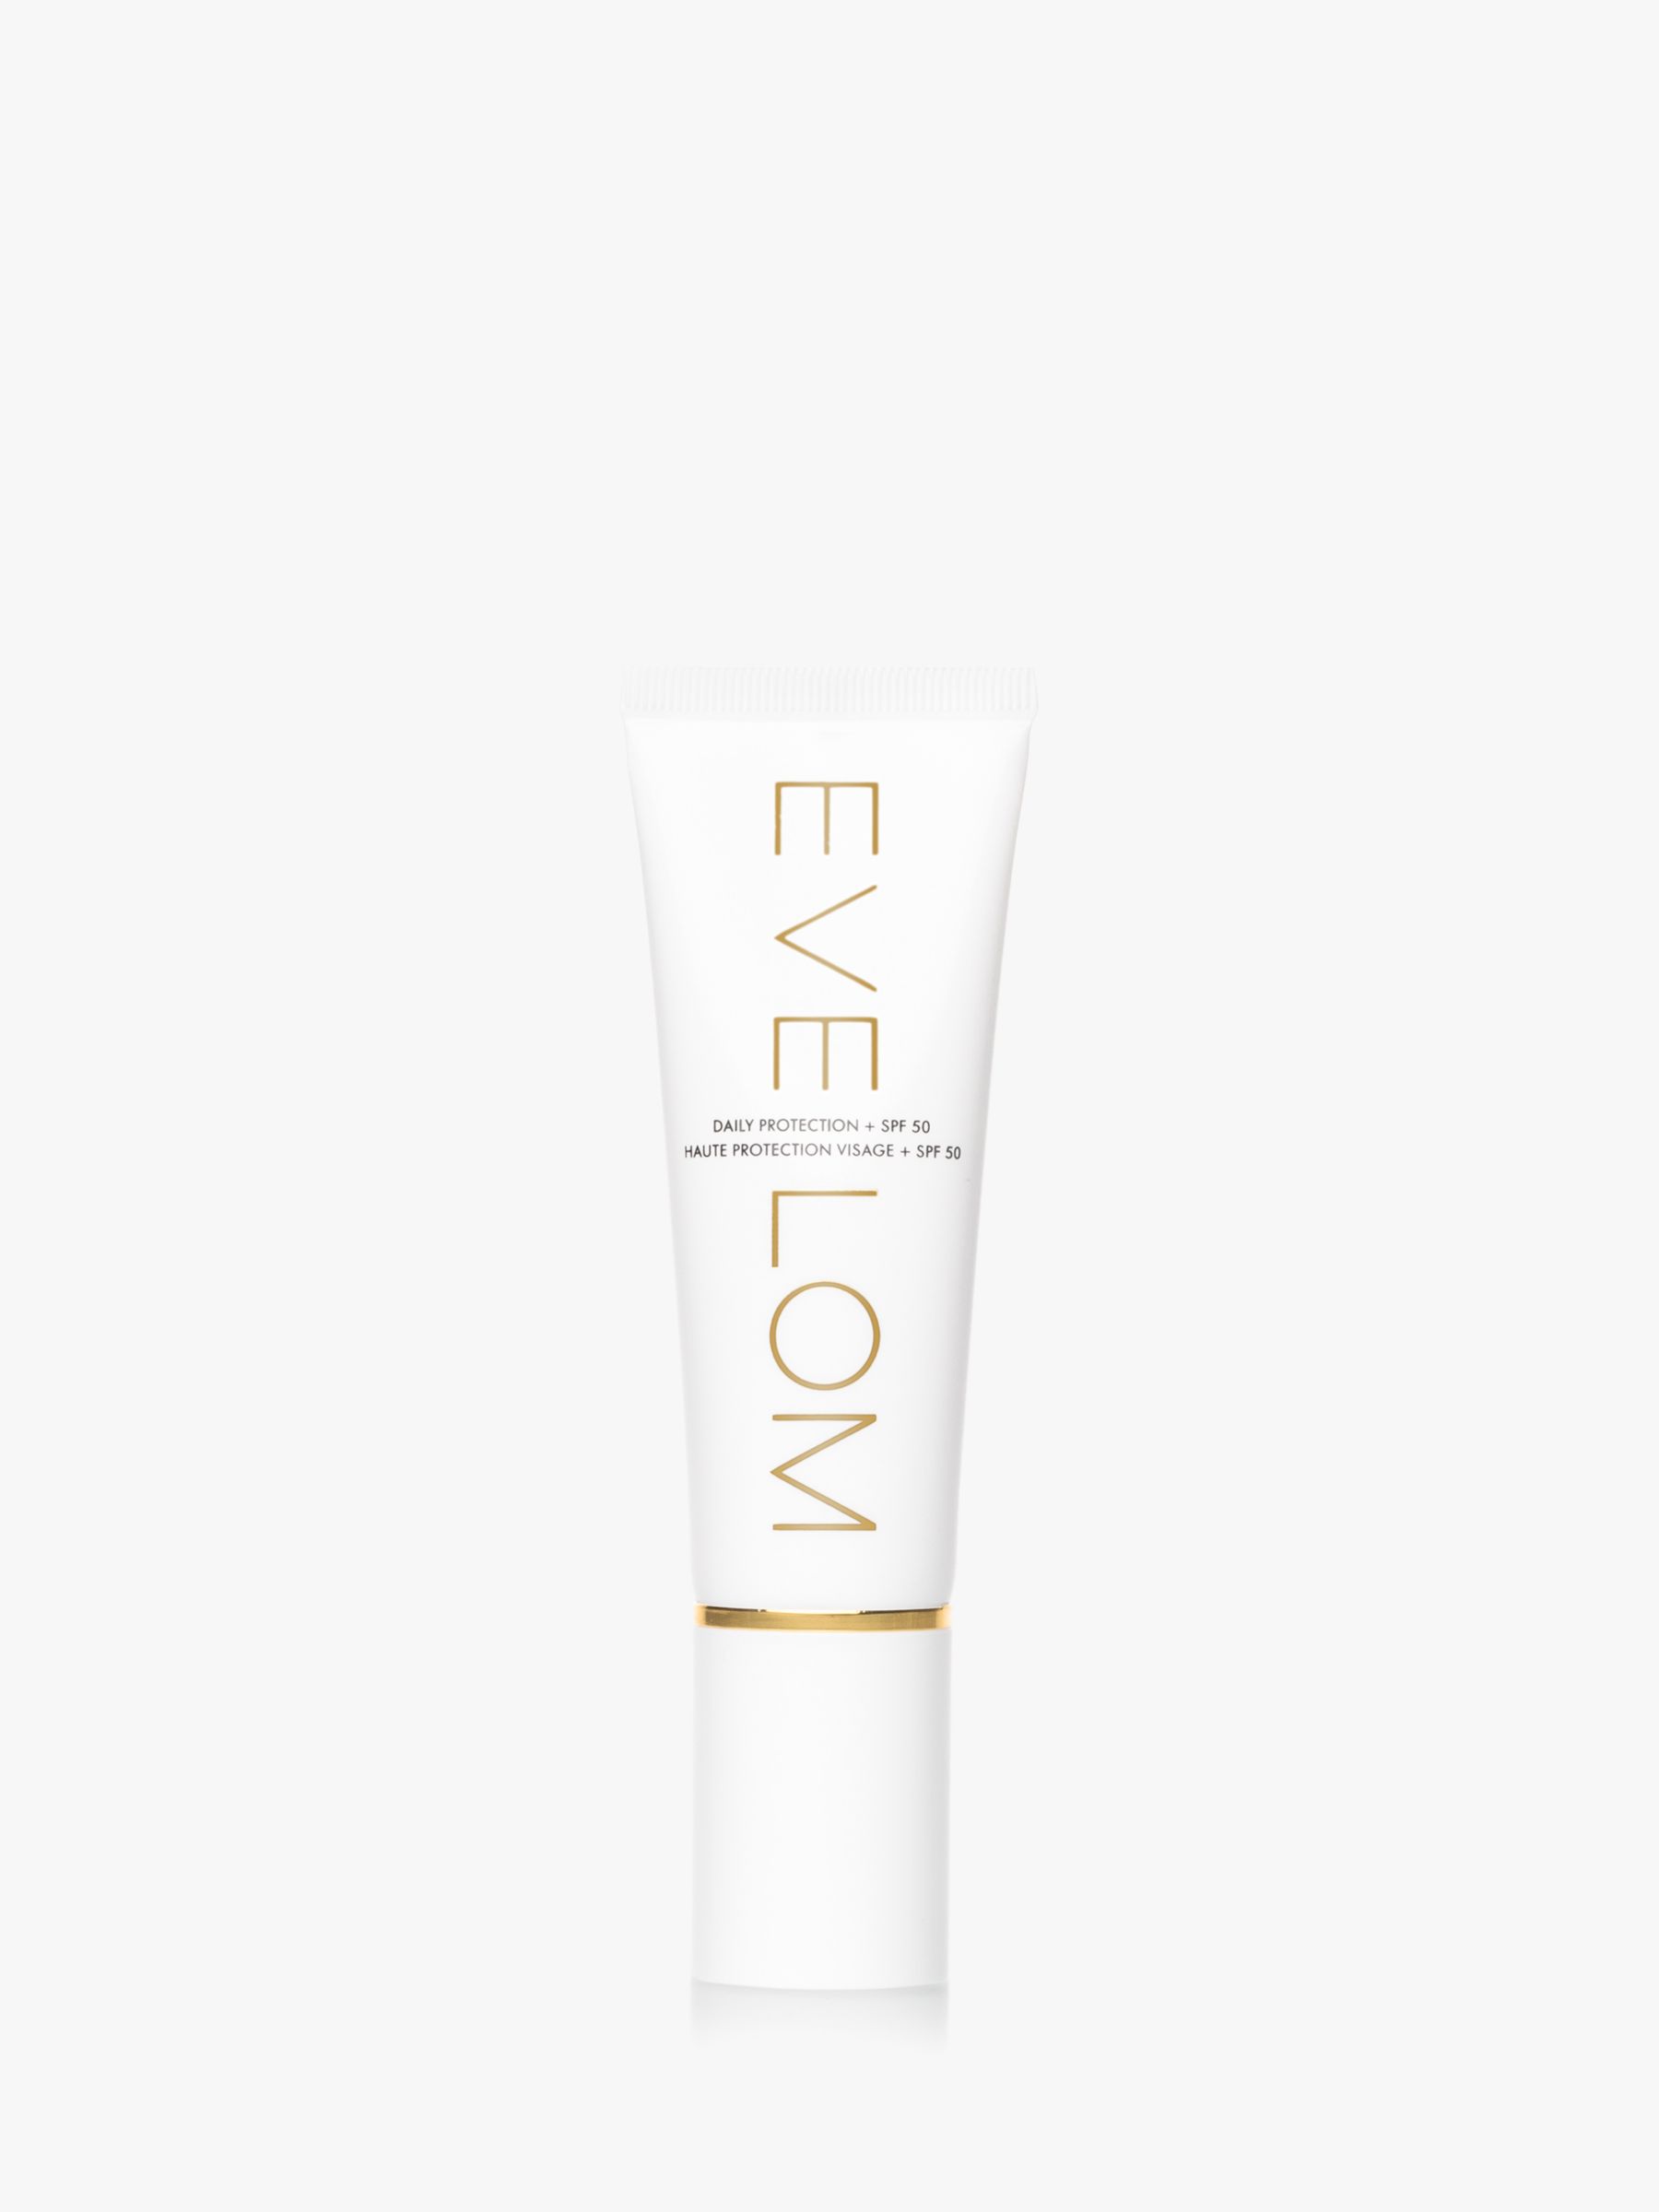 EVE LOM Daily Protection + SPF 50, 50ml 1